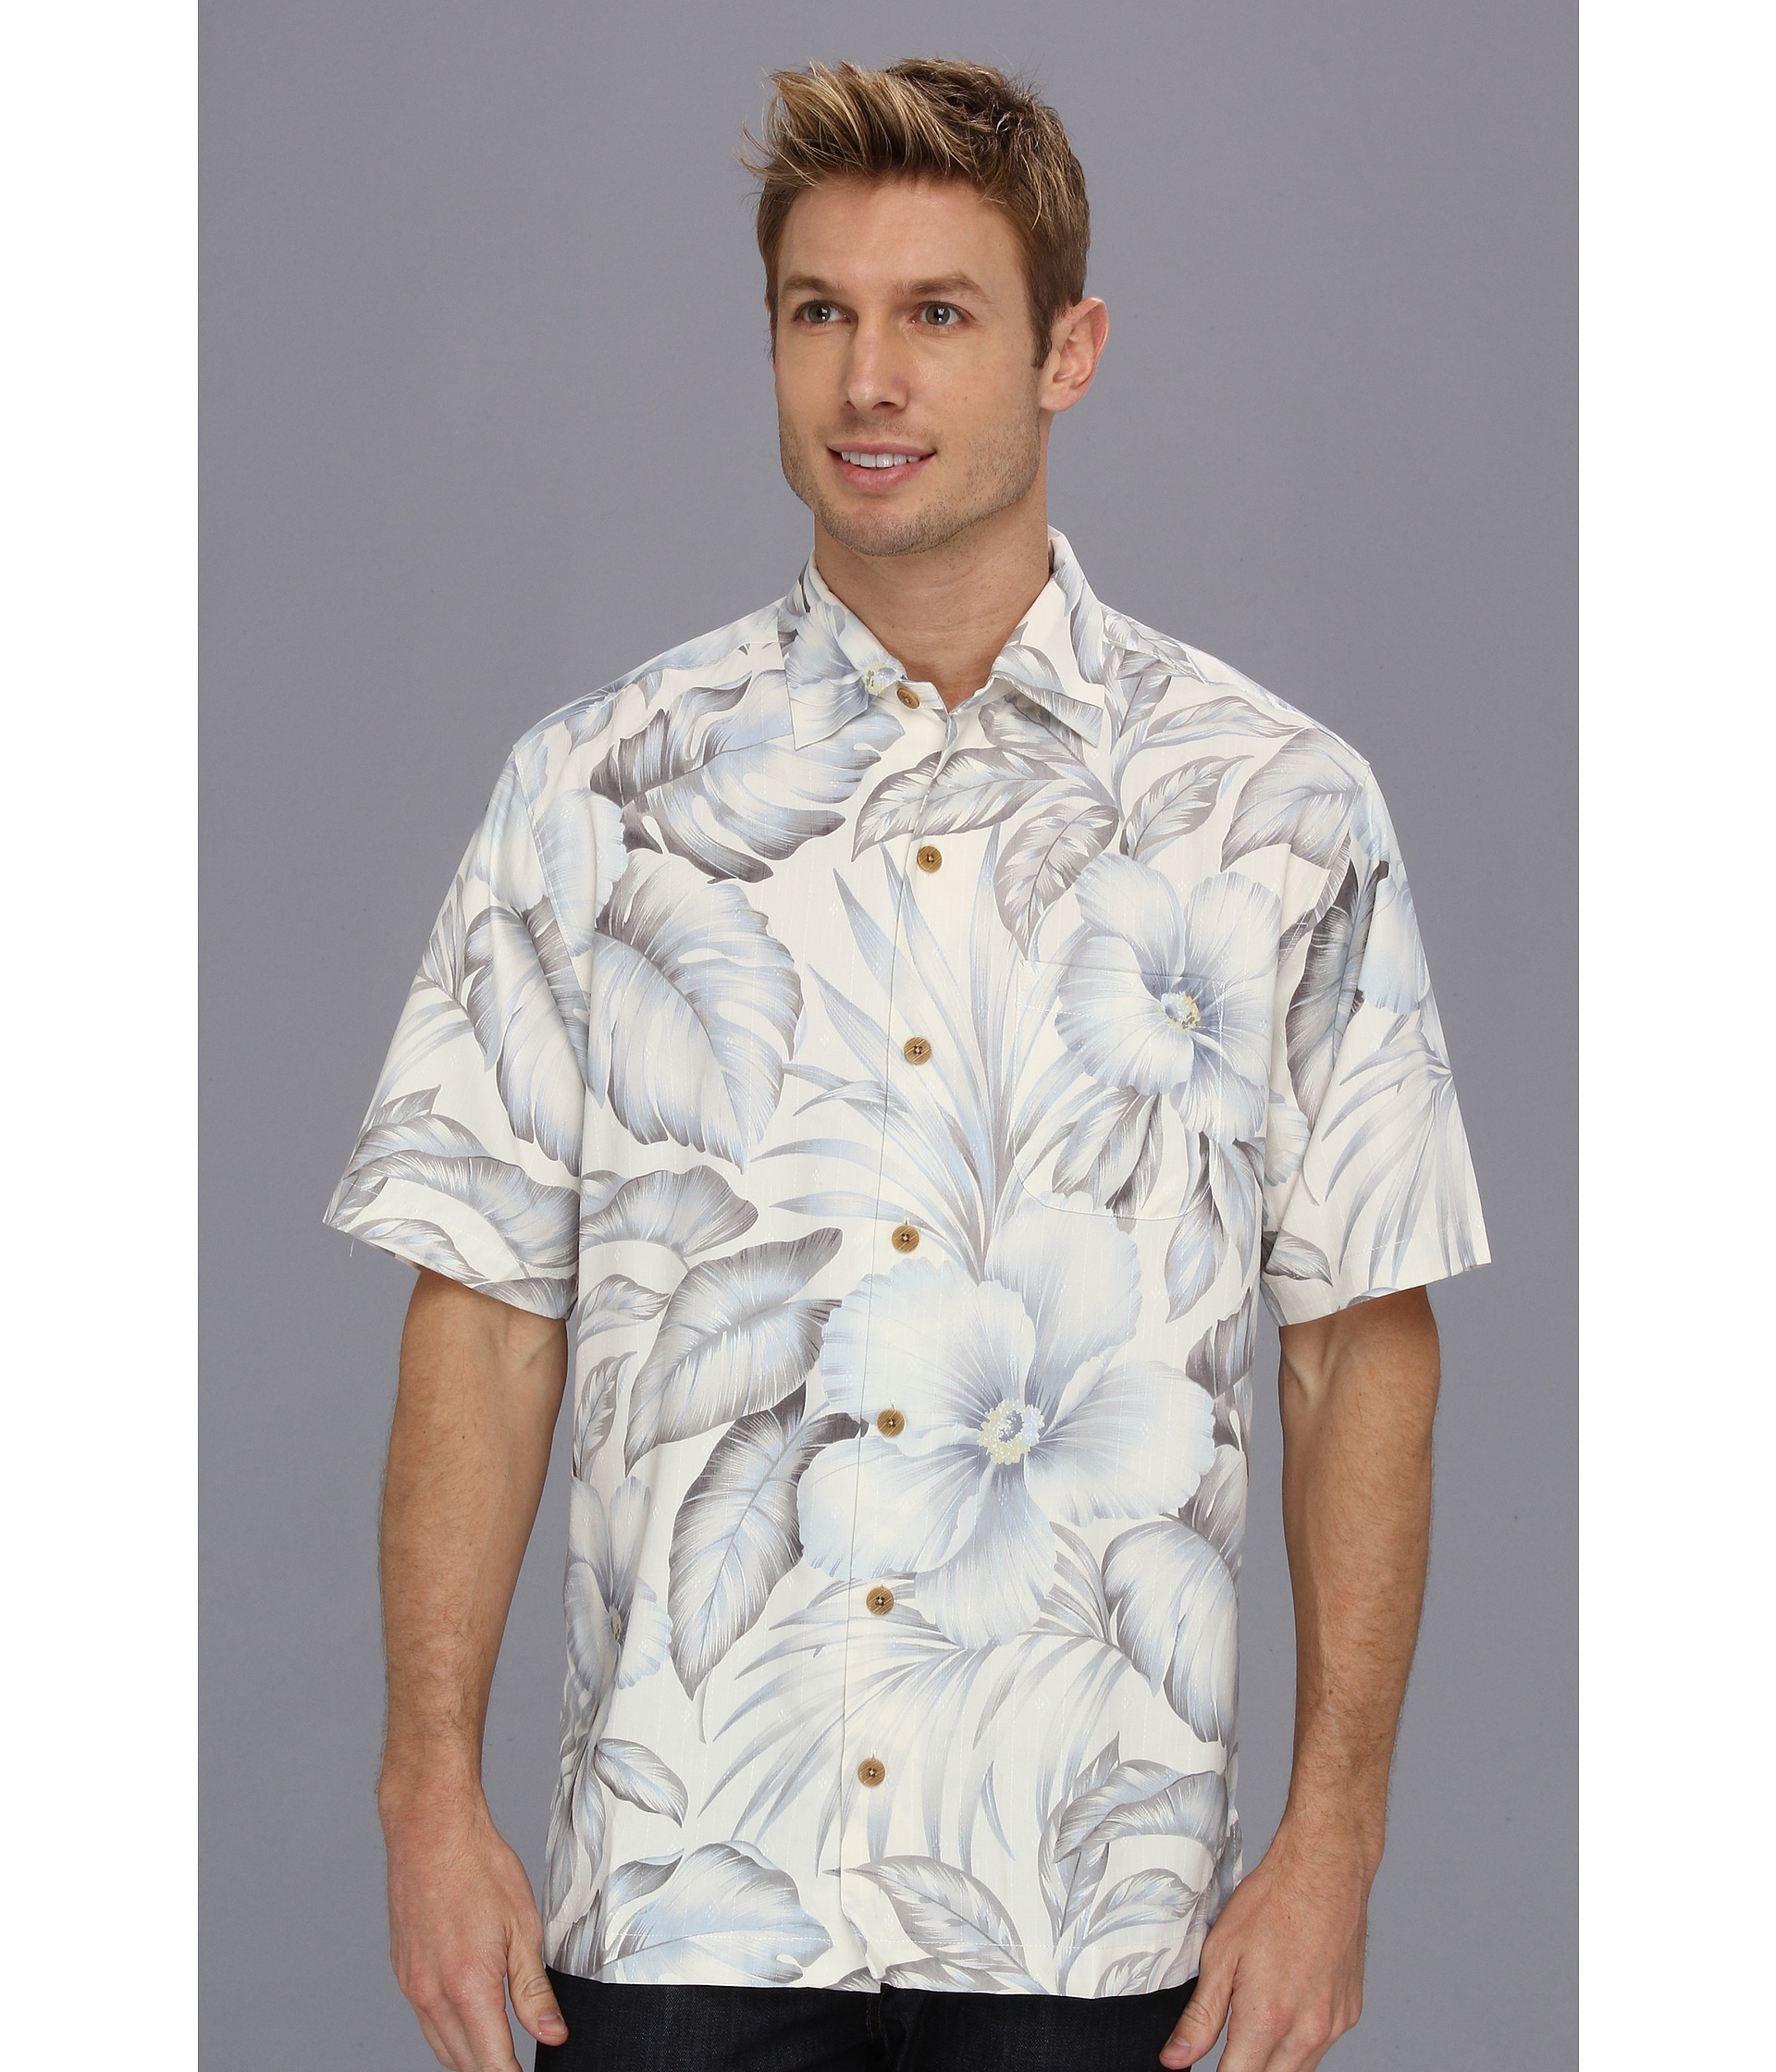 Tommy Bahama Floral Gardens Of Casablanca Camp Shirt Product 1 20257366 3 591358207 Normal 